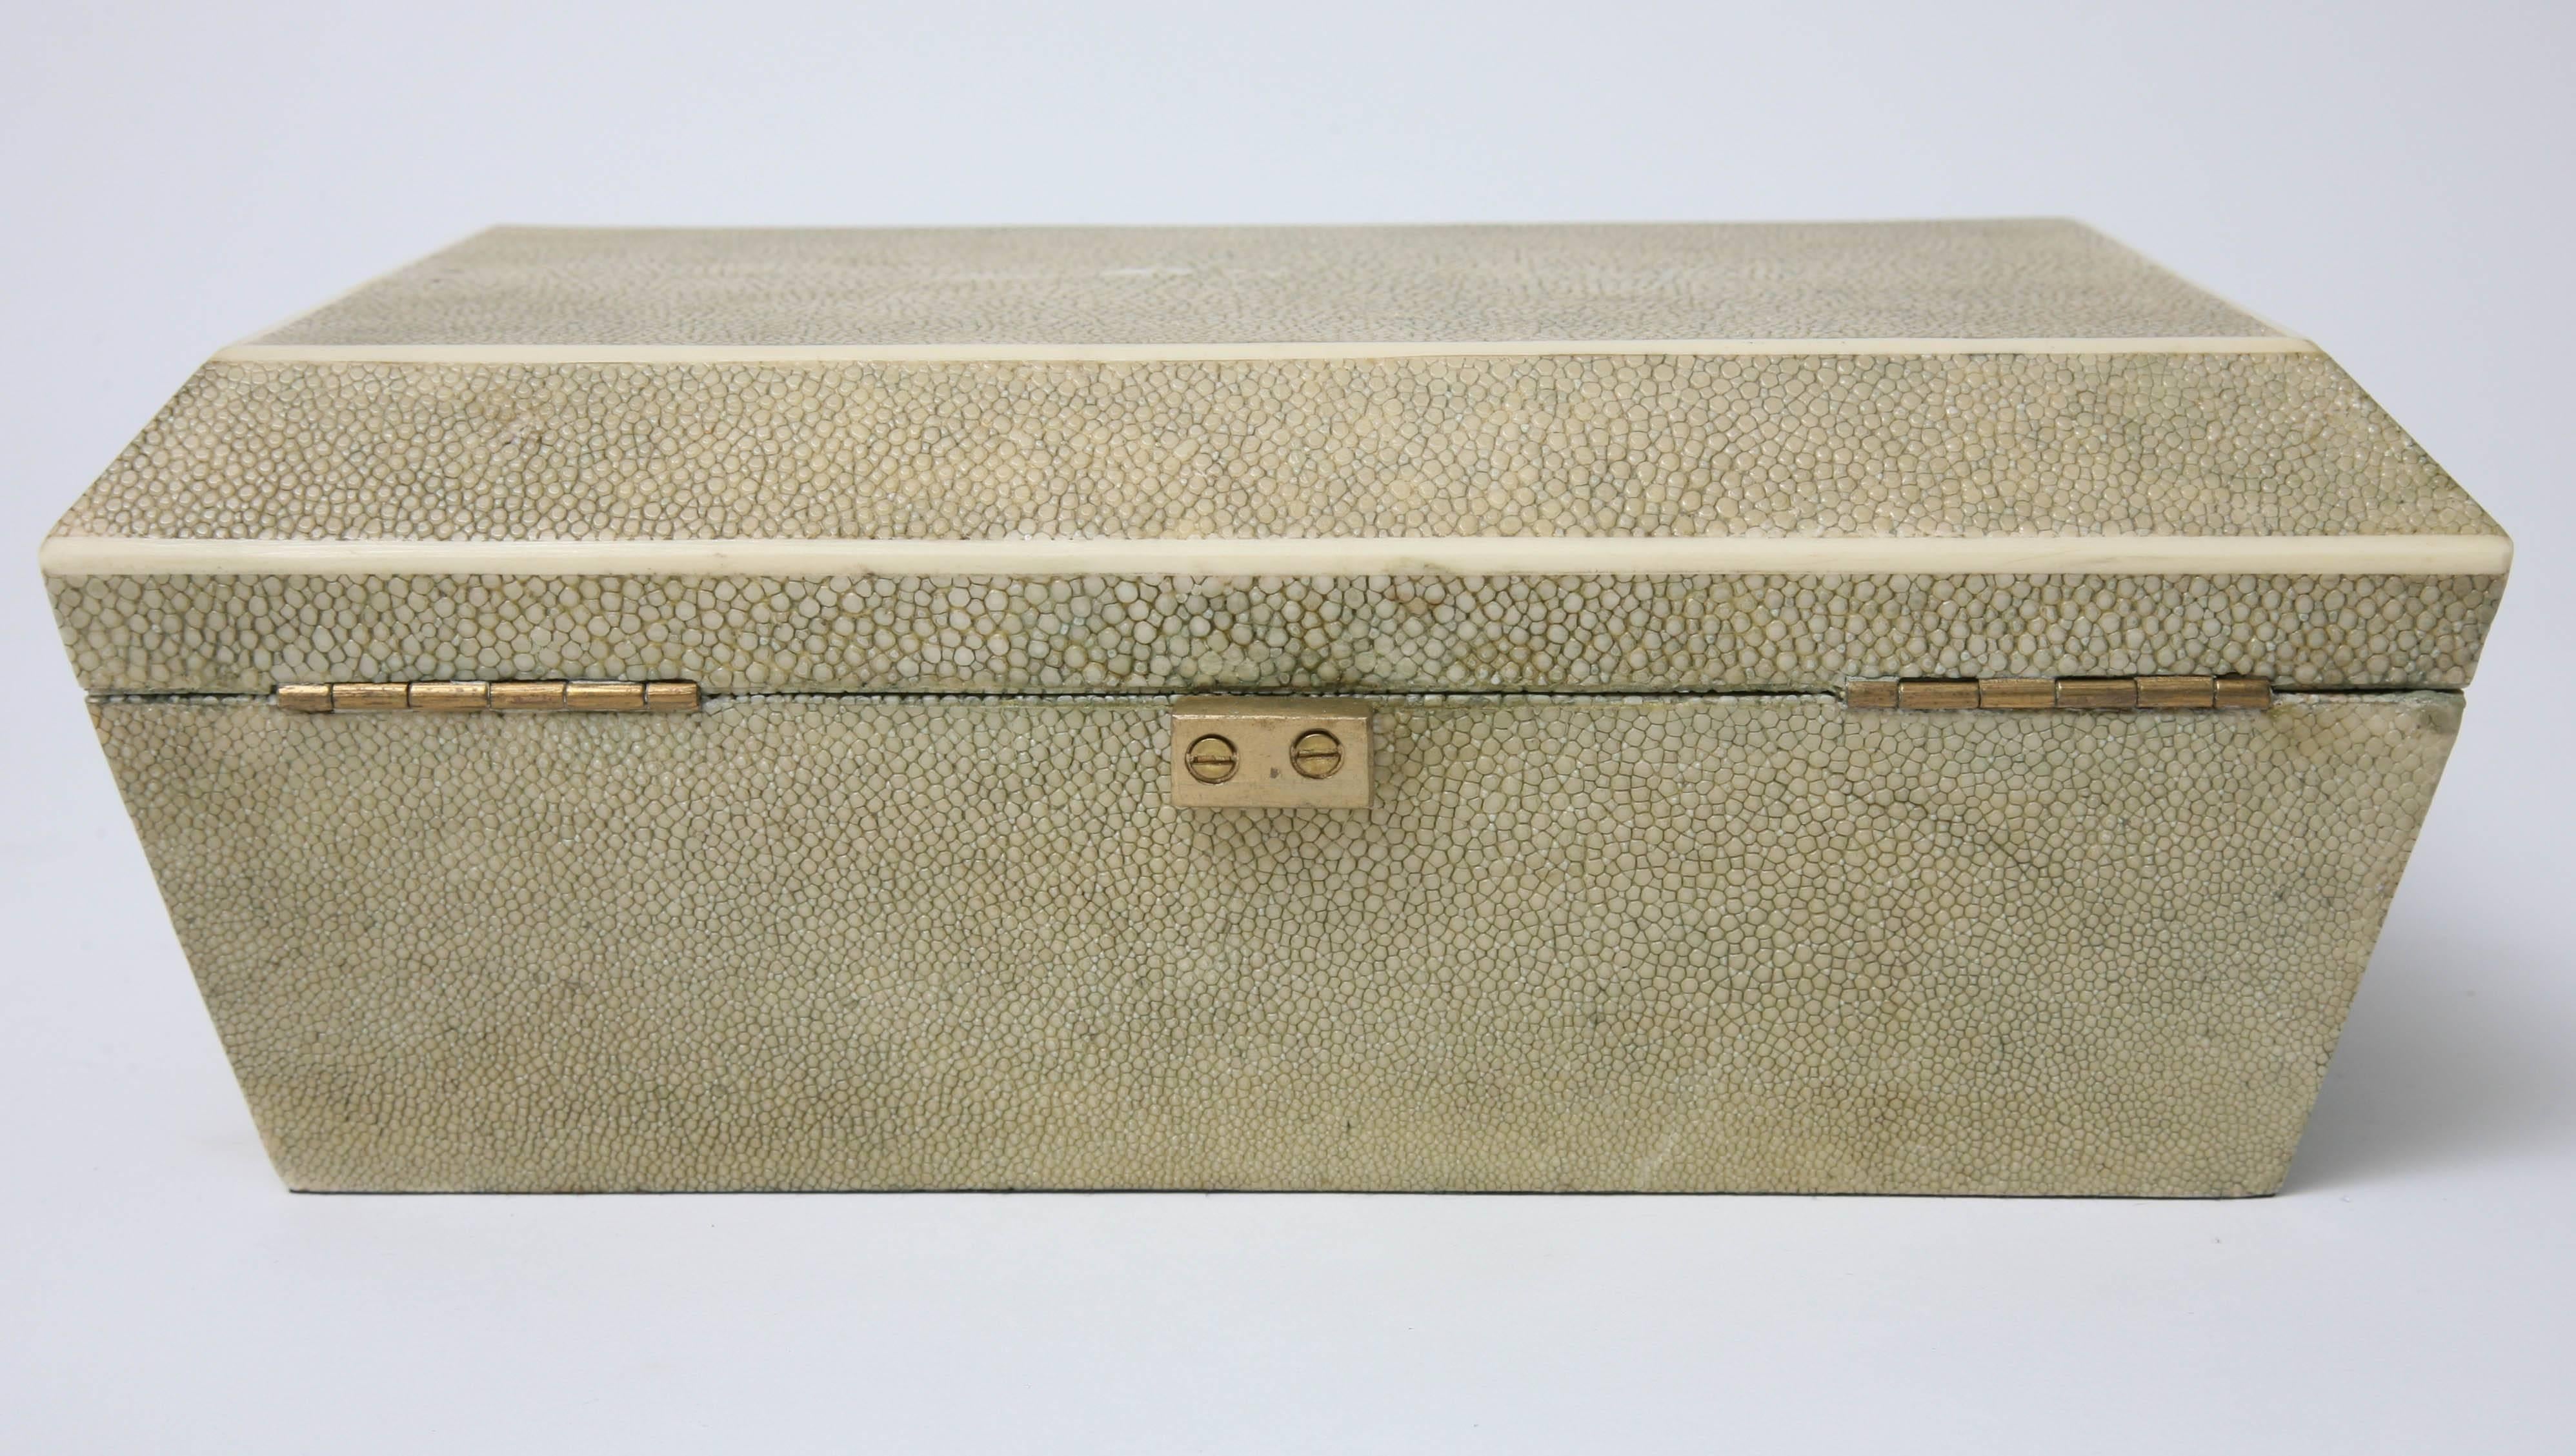 This handsome shagreen and bone box was created by the iconic firm of R & Y of Paris. The shagreen is in a beautiful light-washed-out green coloration with a natural bone-trim and the interior of the box is in a dark-black velour fabric.

For best